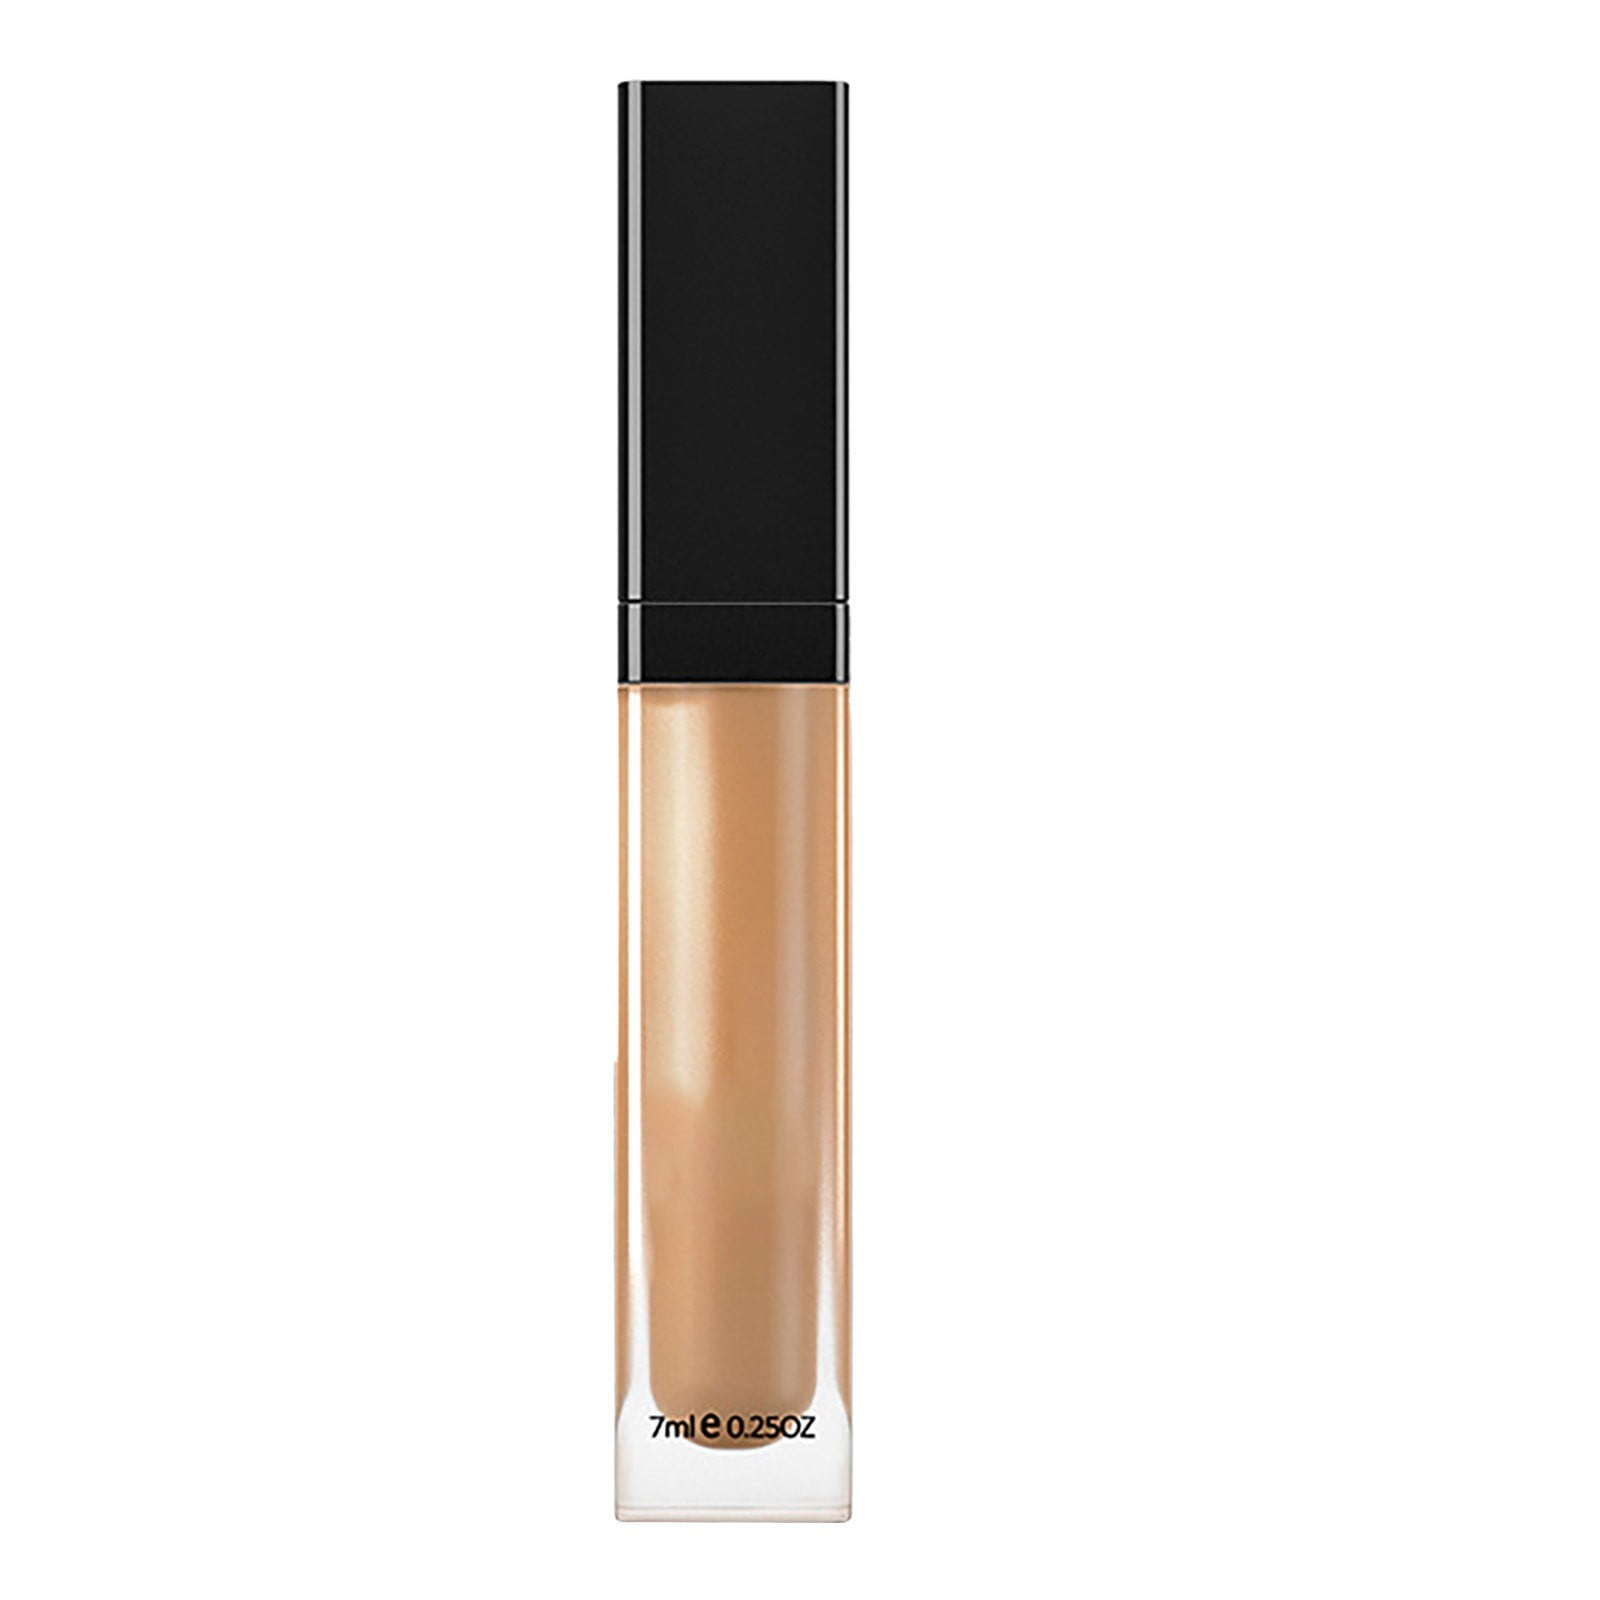 keusn camo concealer full coverage highly pigmented finish light beige long  lasting concealer correction coverage hydrating 7ml 